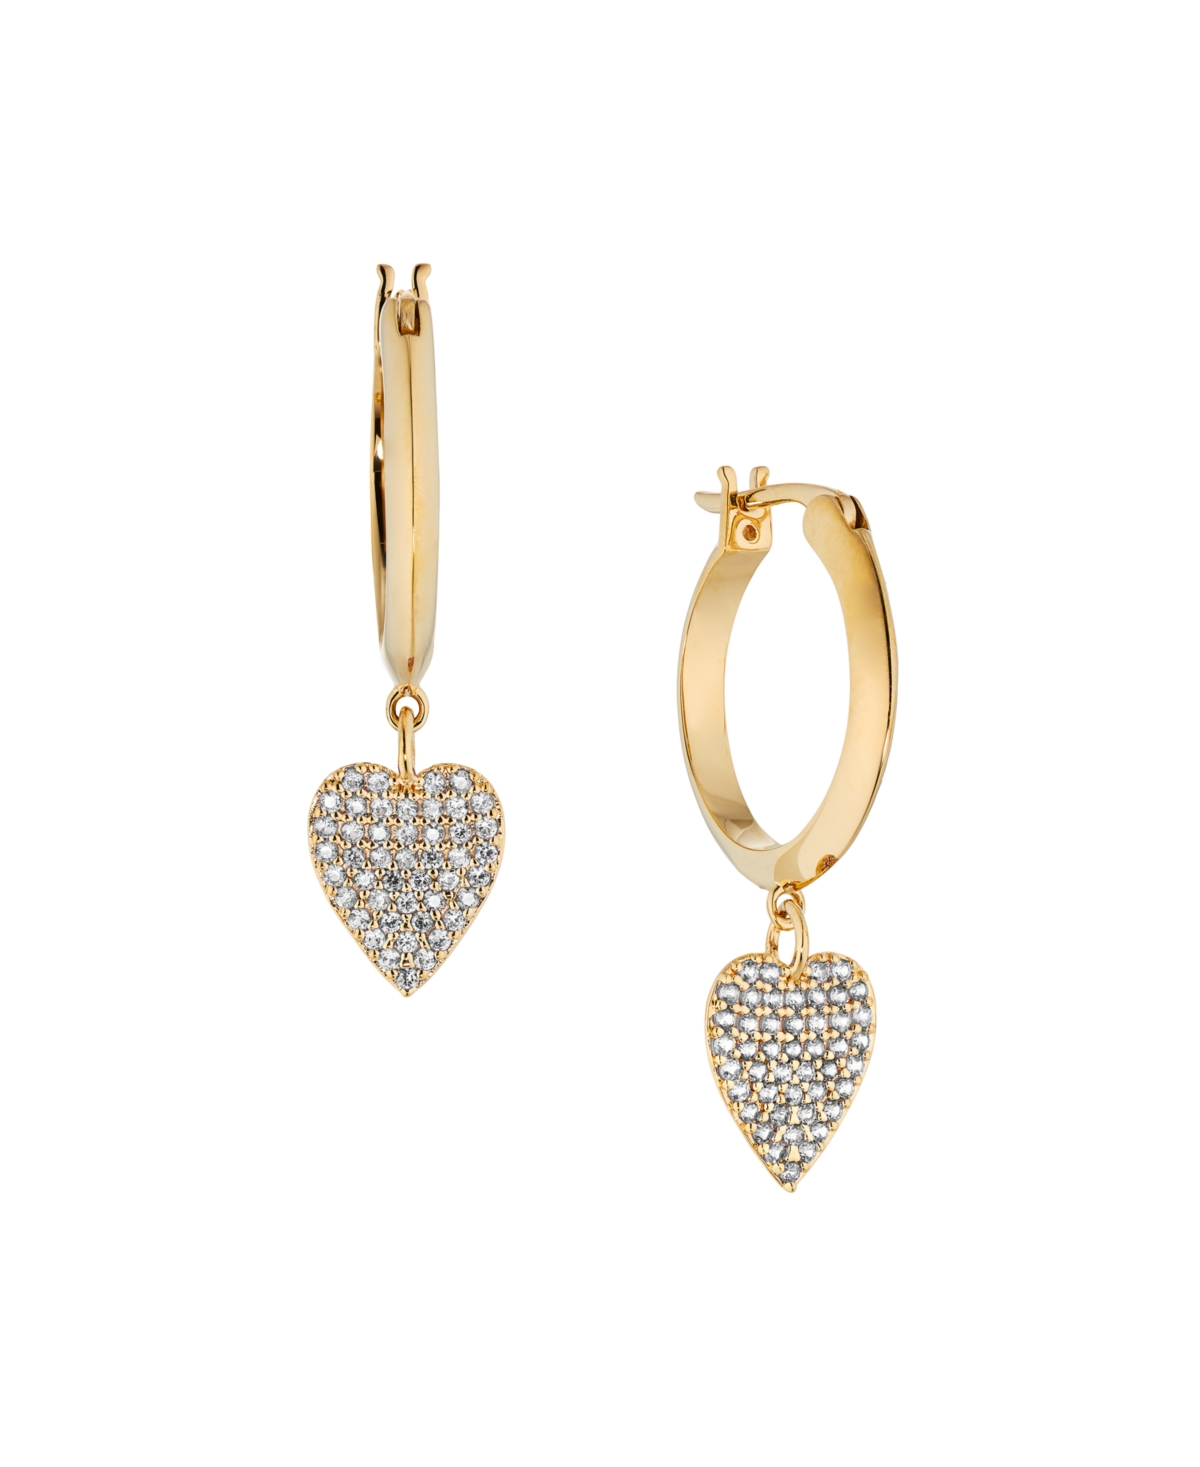 Ava Nadri Extra Small Hoop With Pink Pave Heart Drop Earrings In Gold